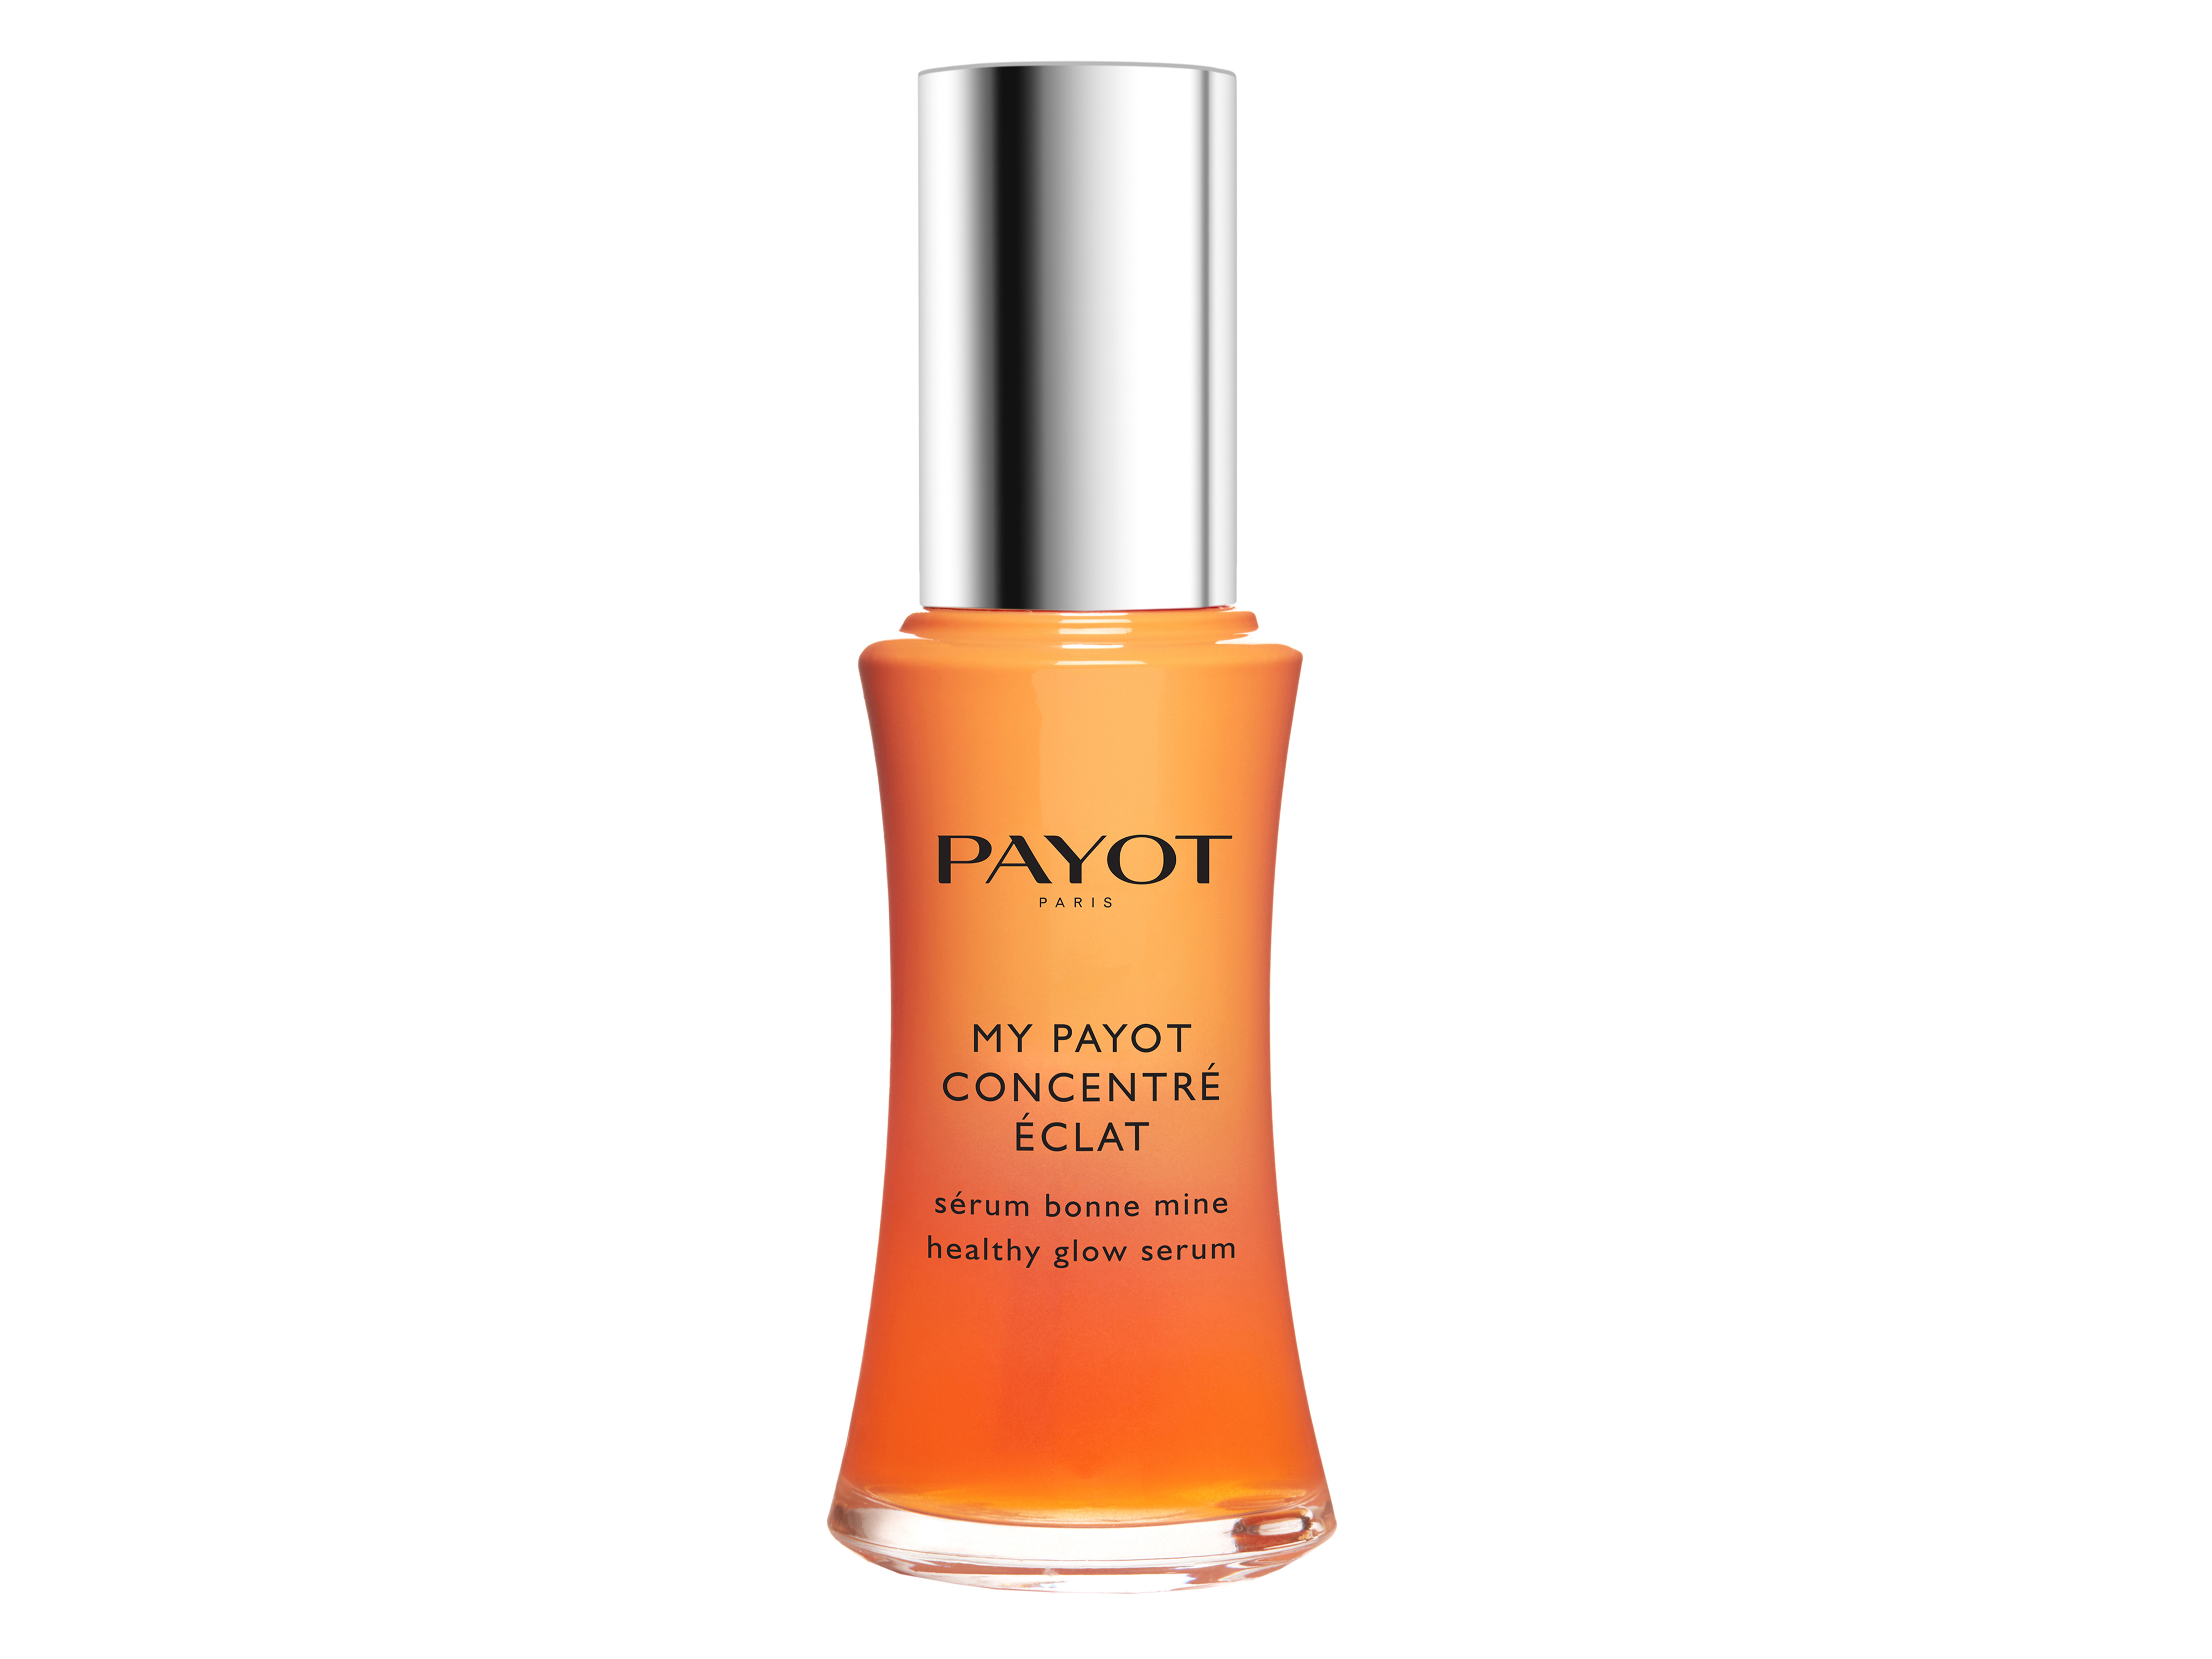 Payot My Payot Concentre Eclat, 30 ml